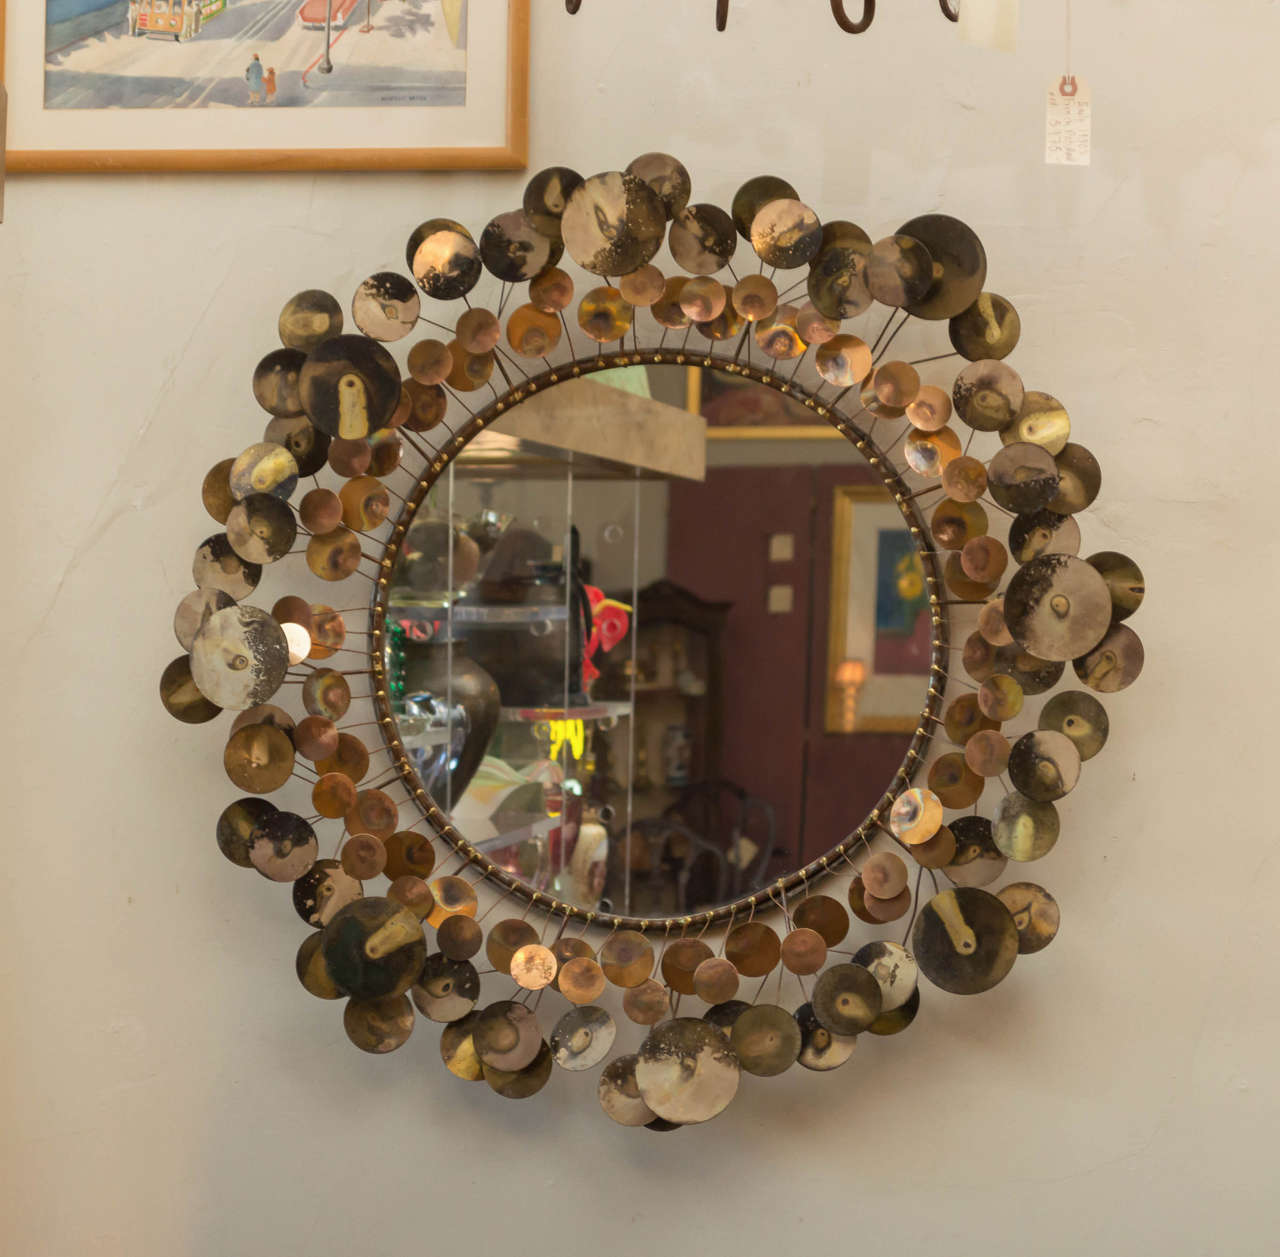 A large vintage wall mirror by C. Jere, signed on a petal, top right. Known as Raindrops, the brass has a very nice patina that only comes with age. A wonderful mirror that works well with all styles.